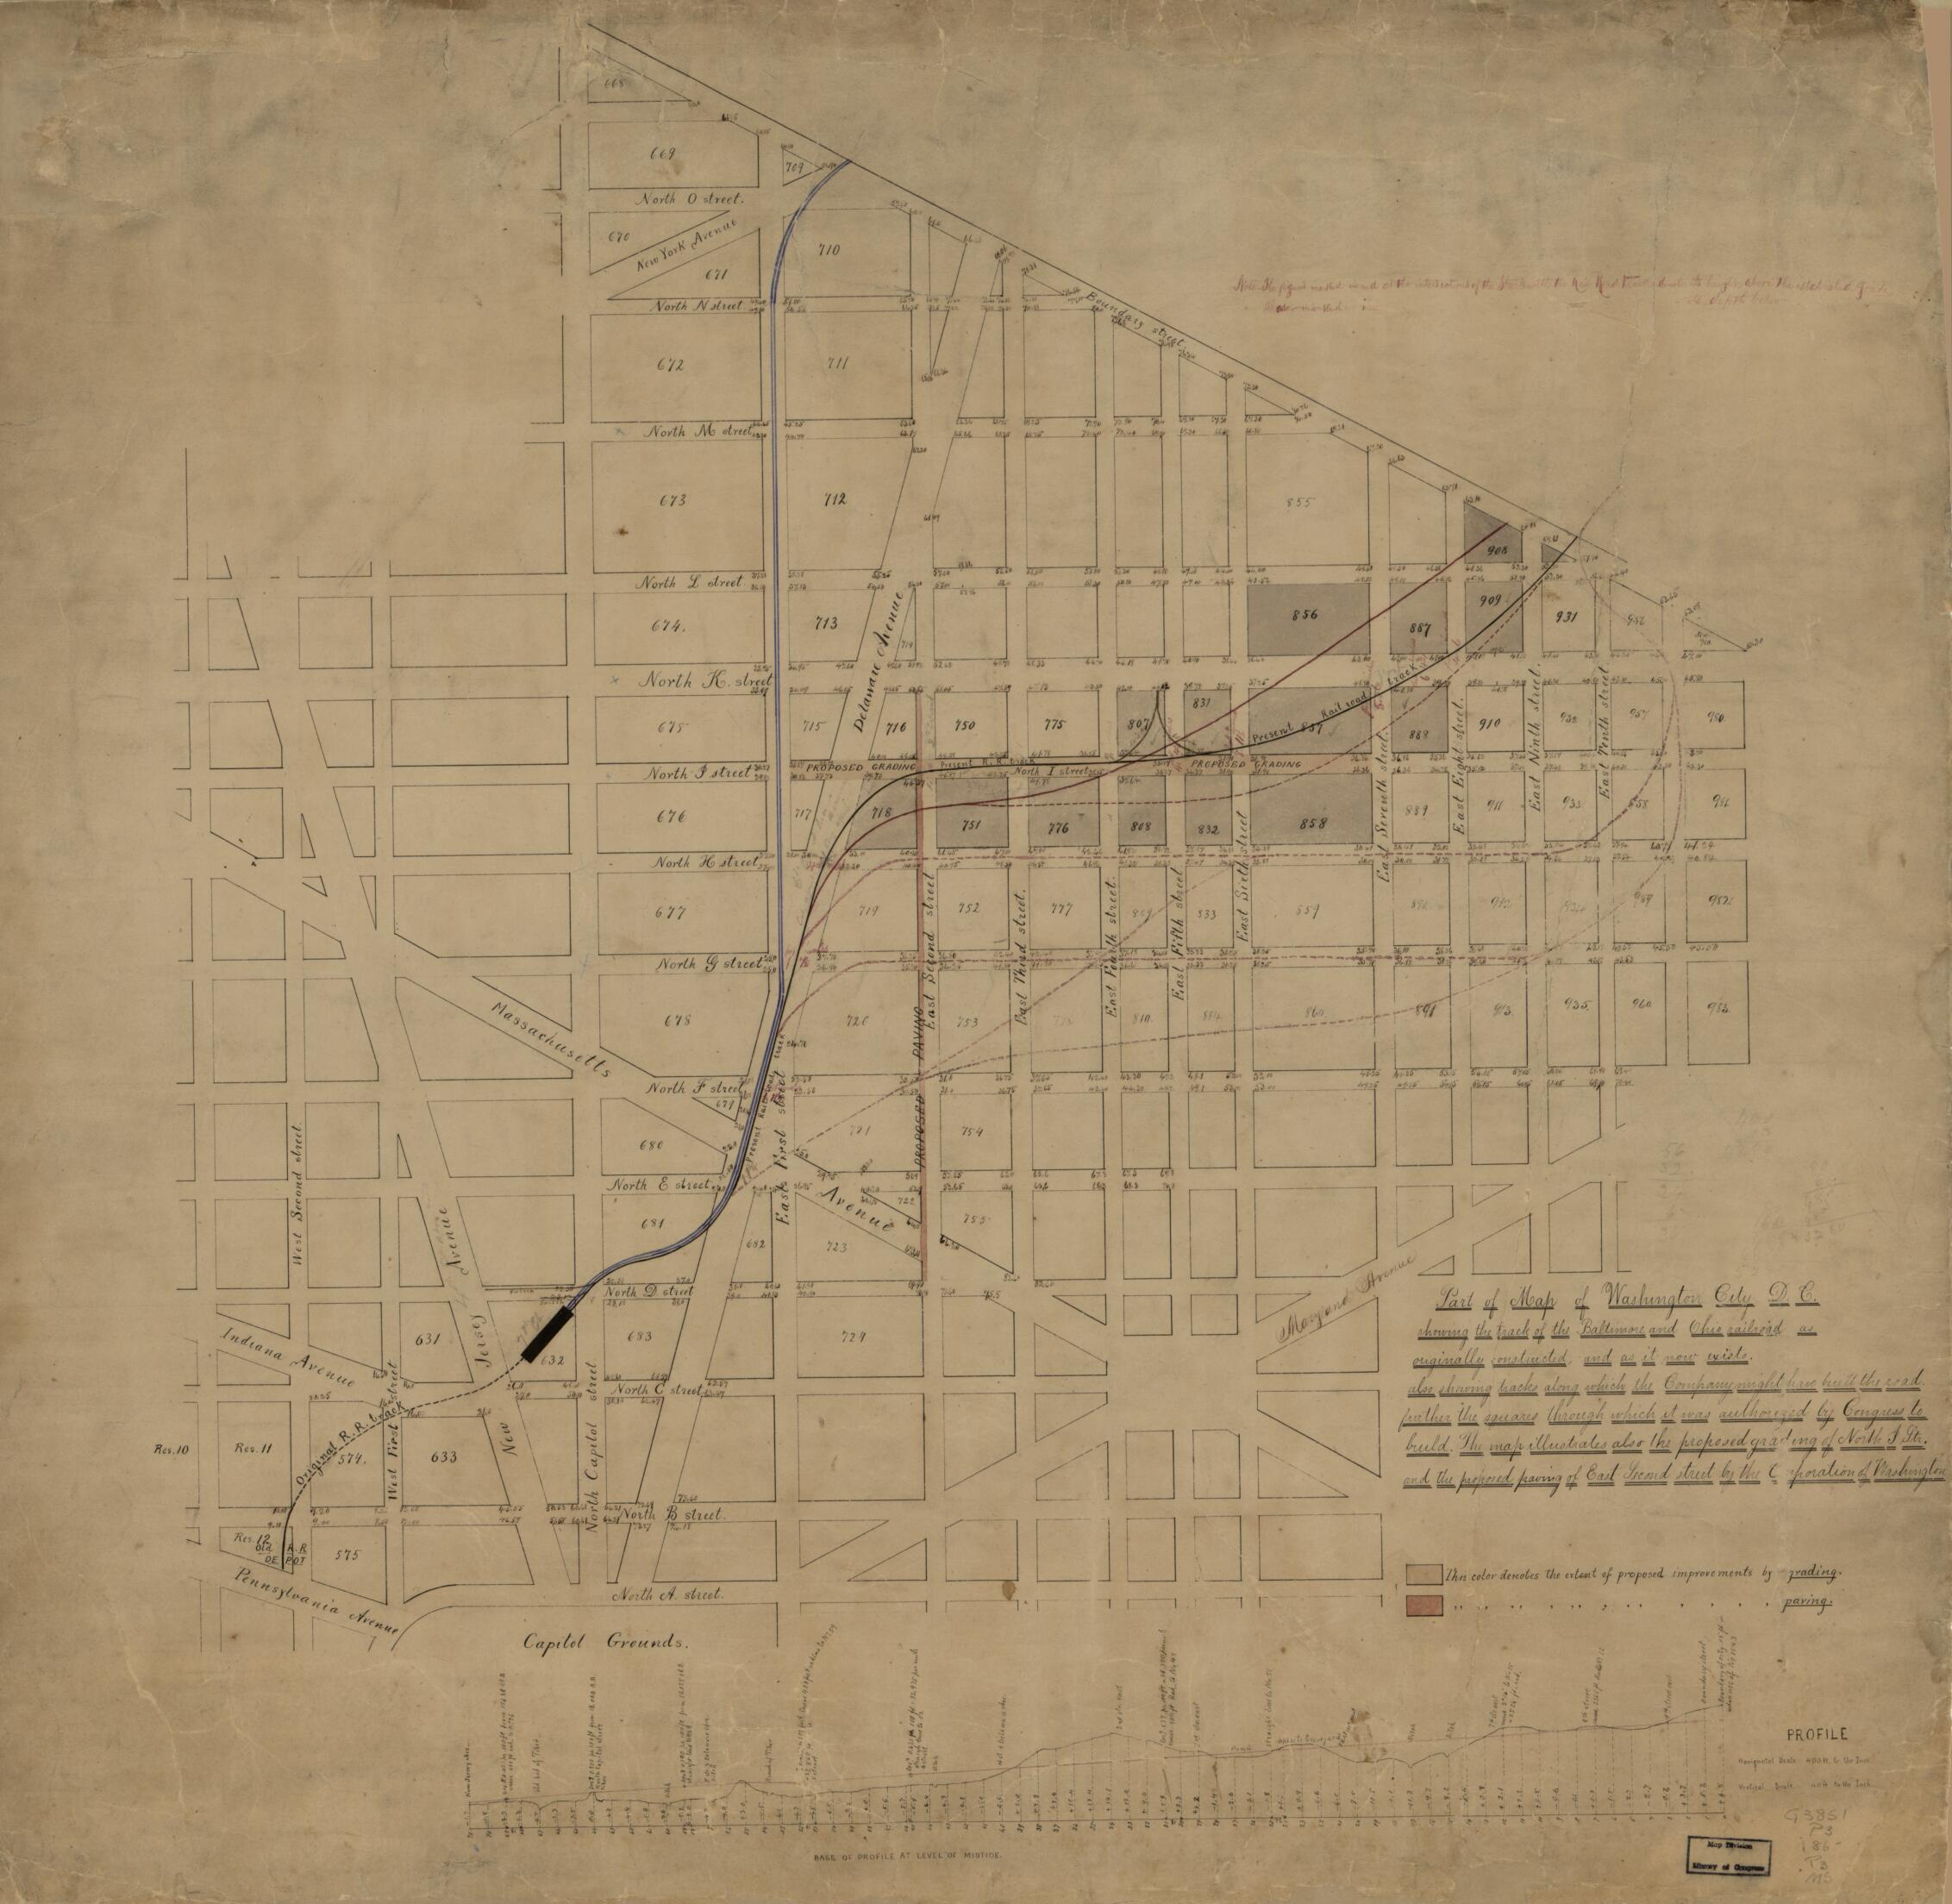 This old map of Part of Map of Washington City D.C. Showing the Track of the Baltimore and Ohio Railroad As Originally Constructed and As It Now Exists : Also Showing Tracks Along Which the Company Might Have Built the Road.. and the Proposed Paving of E